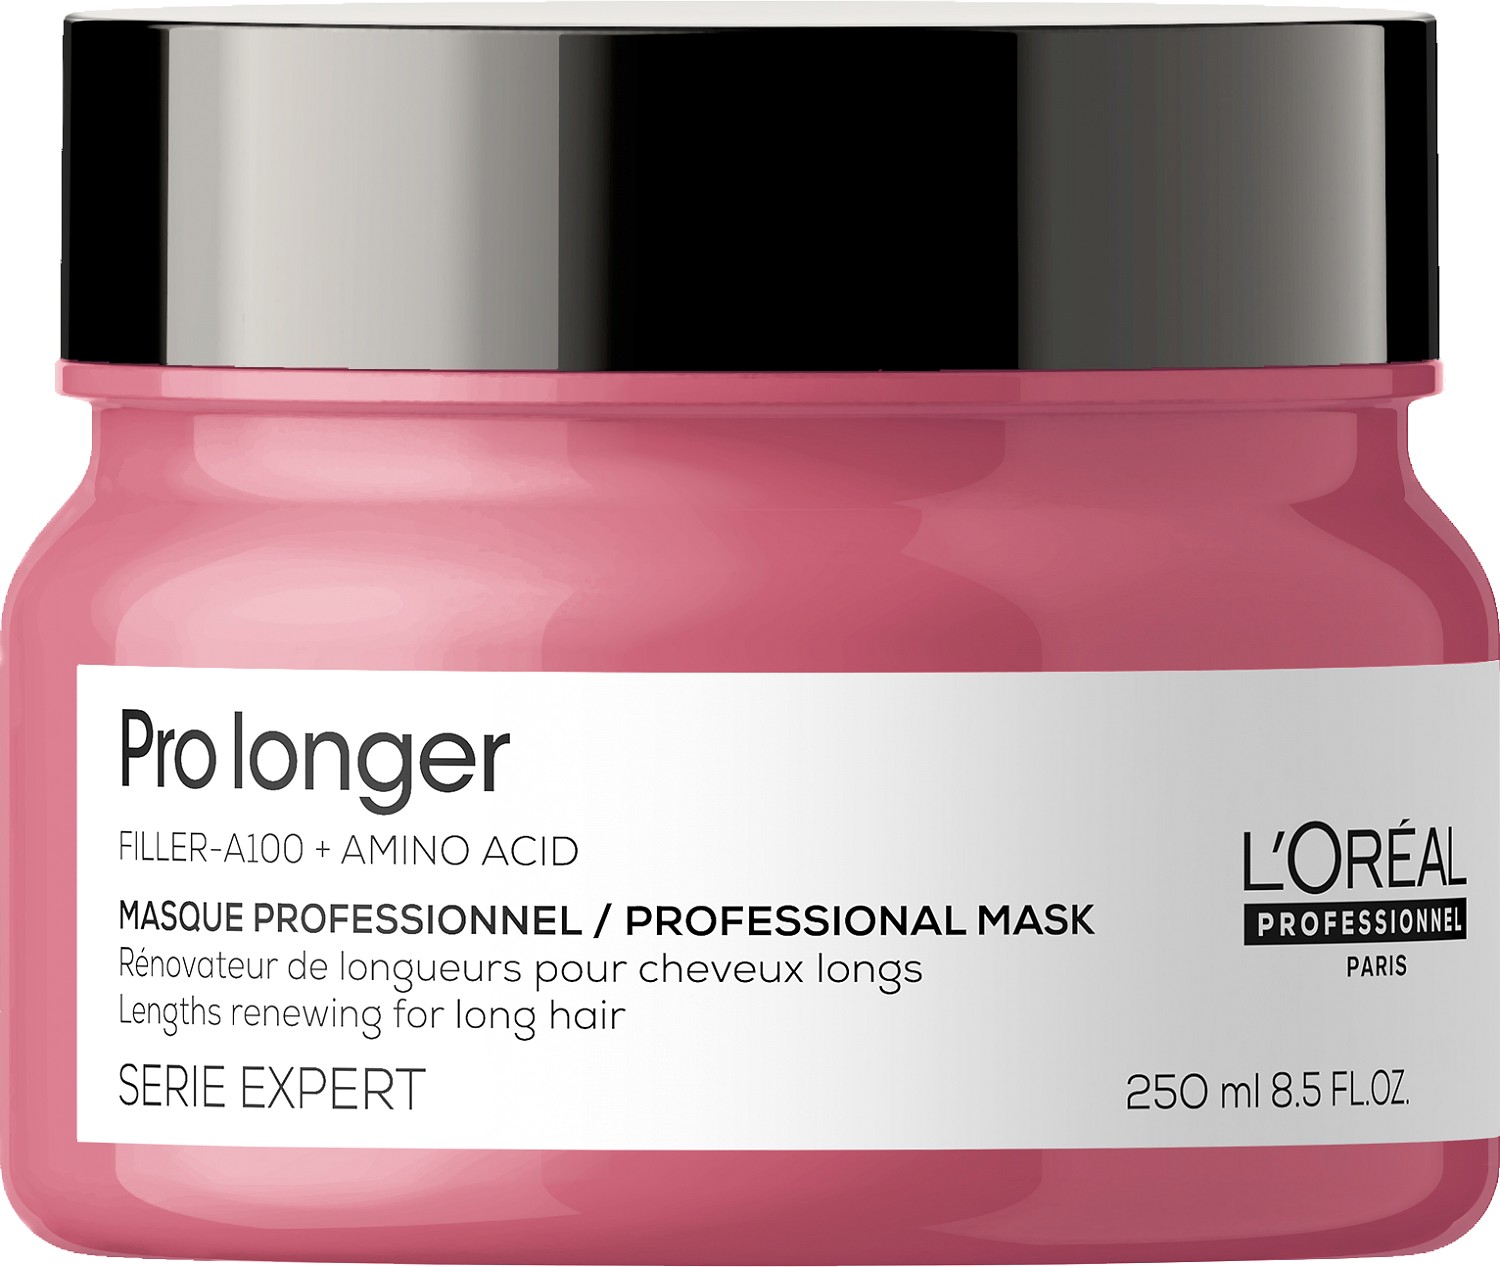 L oreal professionnel liss. L'Oreal Professionnel serie Expert Blondifier. Маска лореаль serie Expert Absolut. L'Oreal Professionnel Vitamino Color маска для окрашенных волос 500 мл. L'Oreal Professionnel Vitamino Color Resveratrol маска для окрашенных волос.